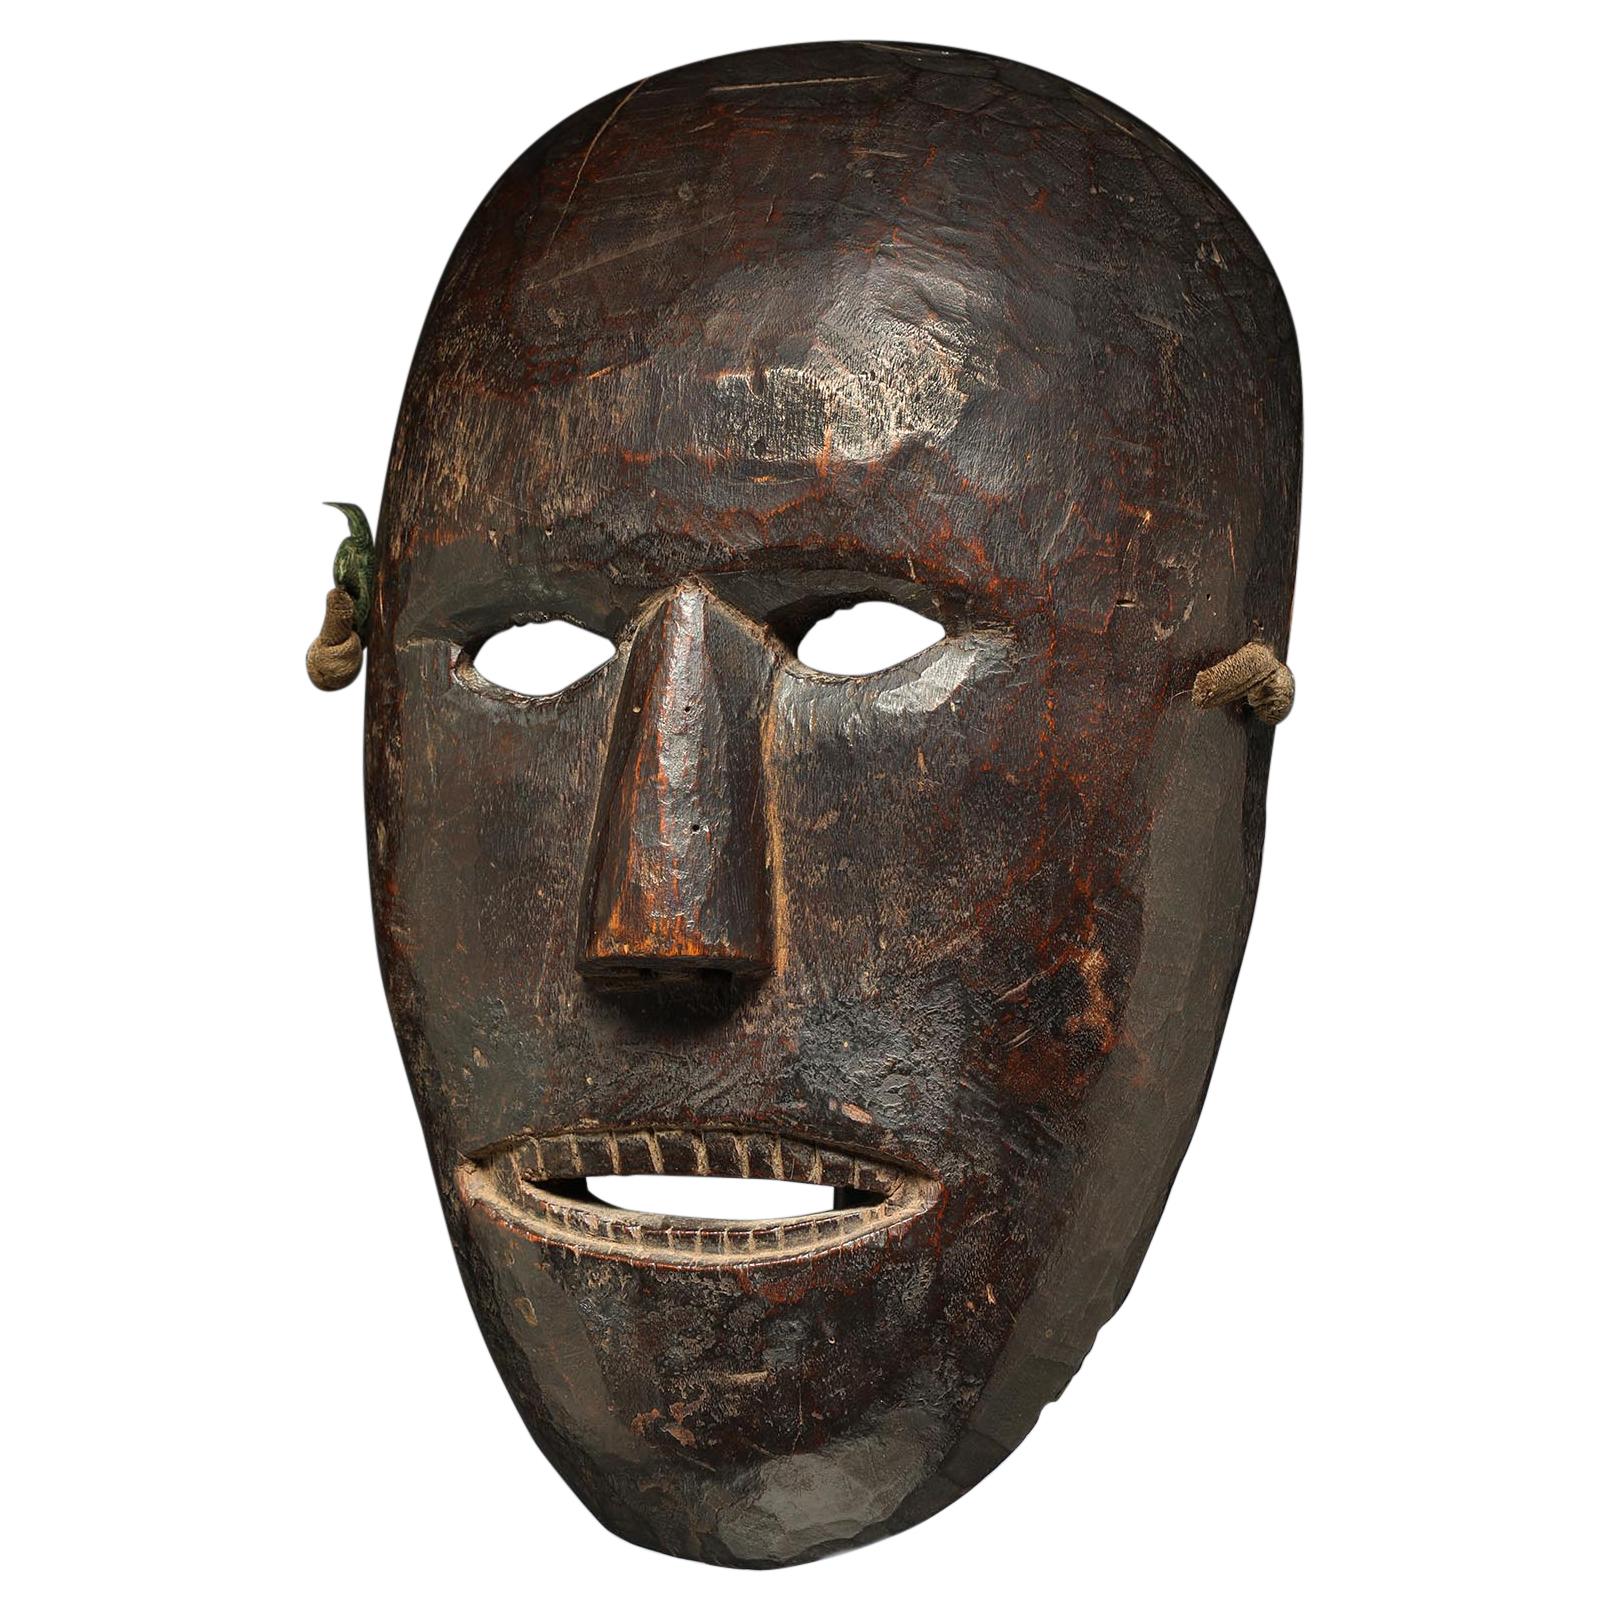 Nepal Dance Mask Oval Face with Open Mouth Teeth, Late 19th-Early 20th Century